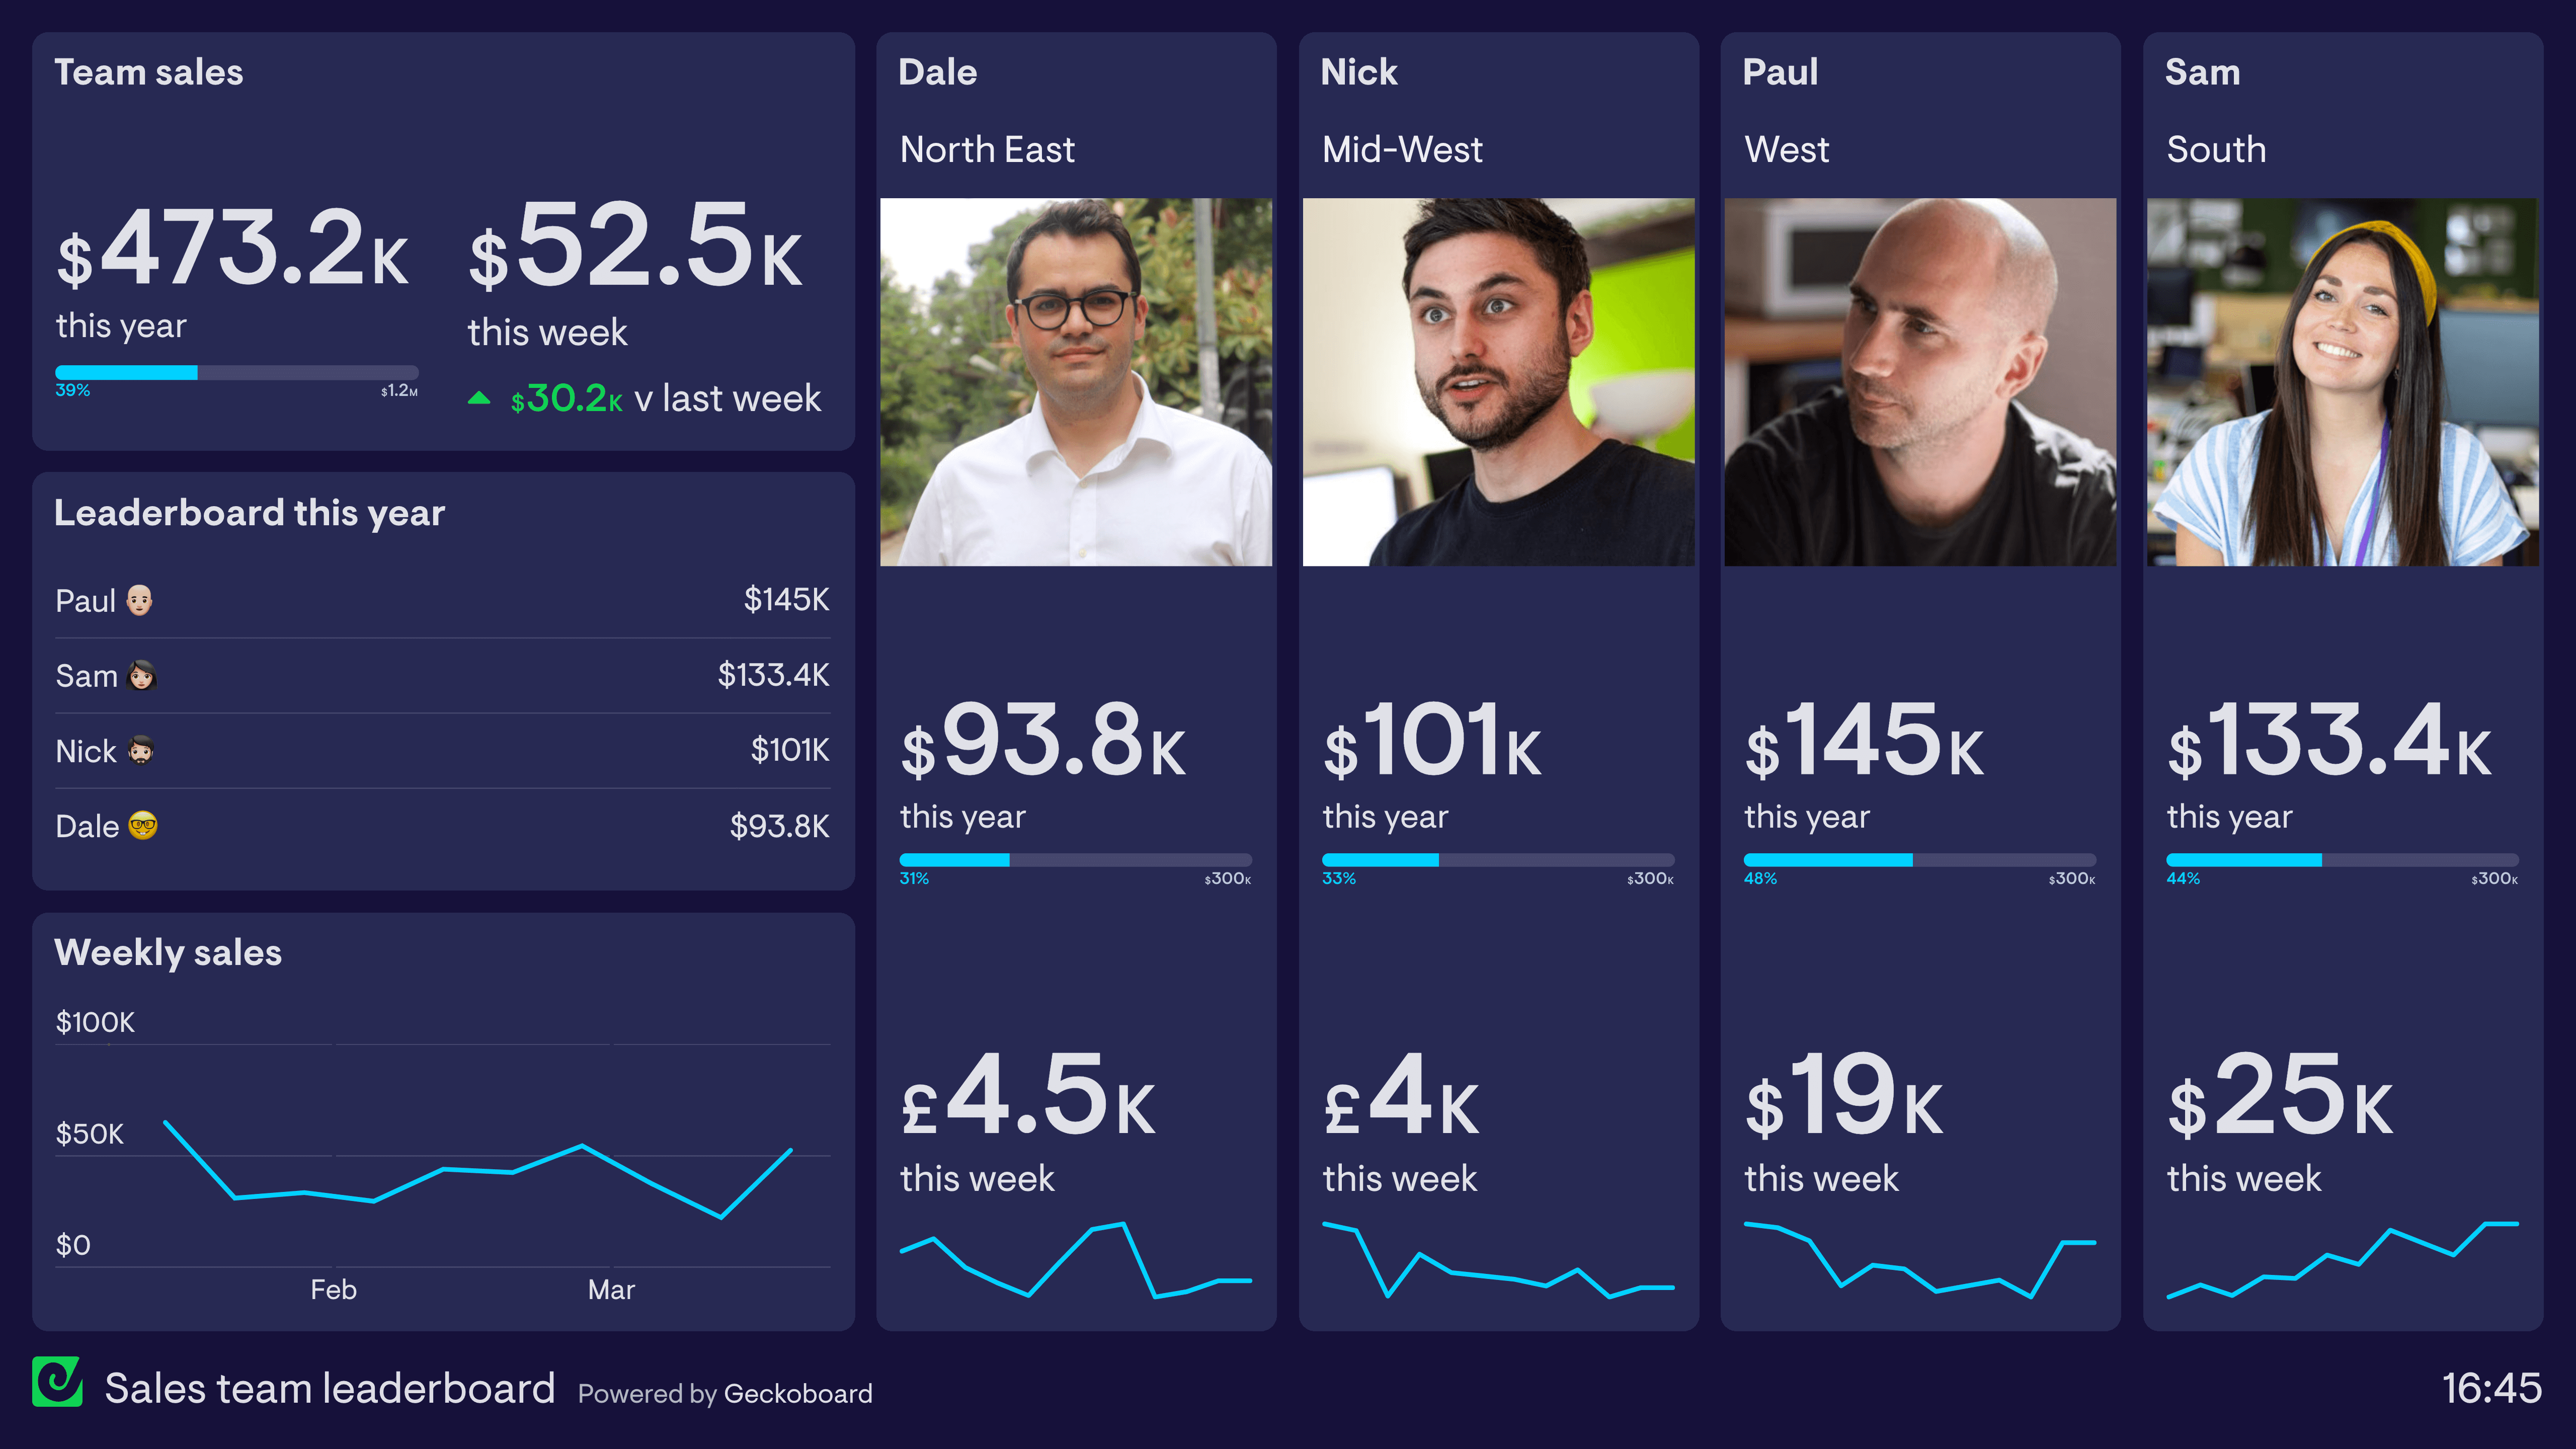 Examples of a sales competition dashboard with images of sales people